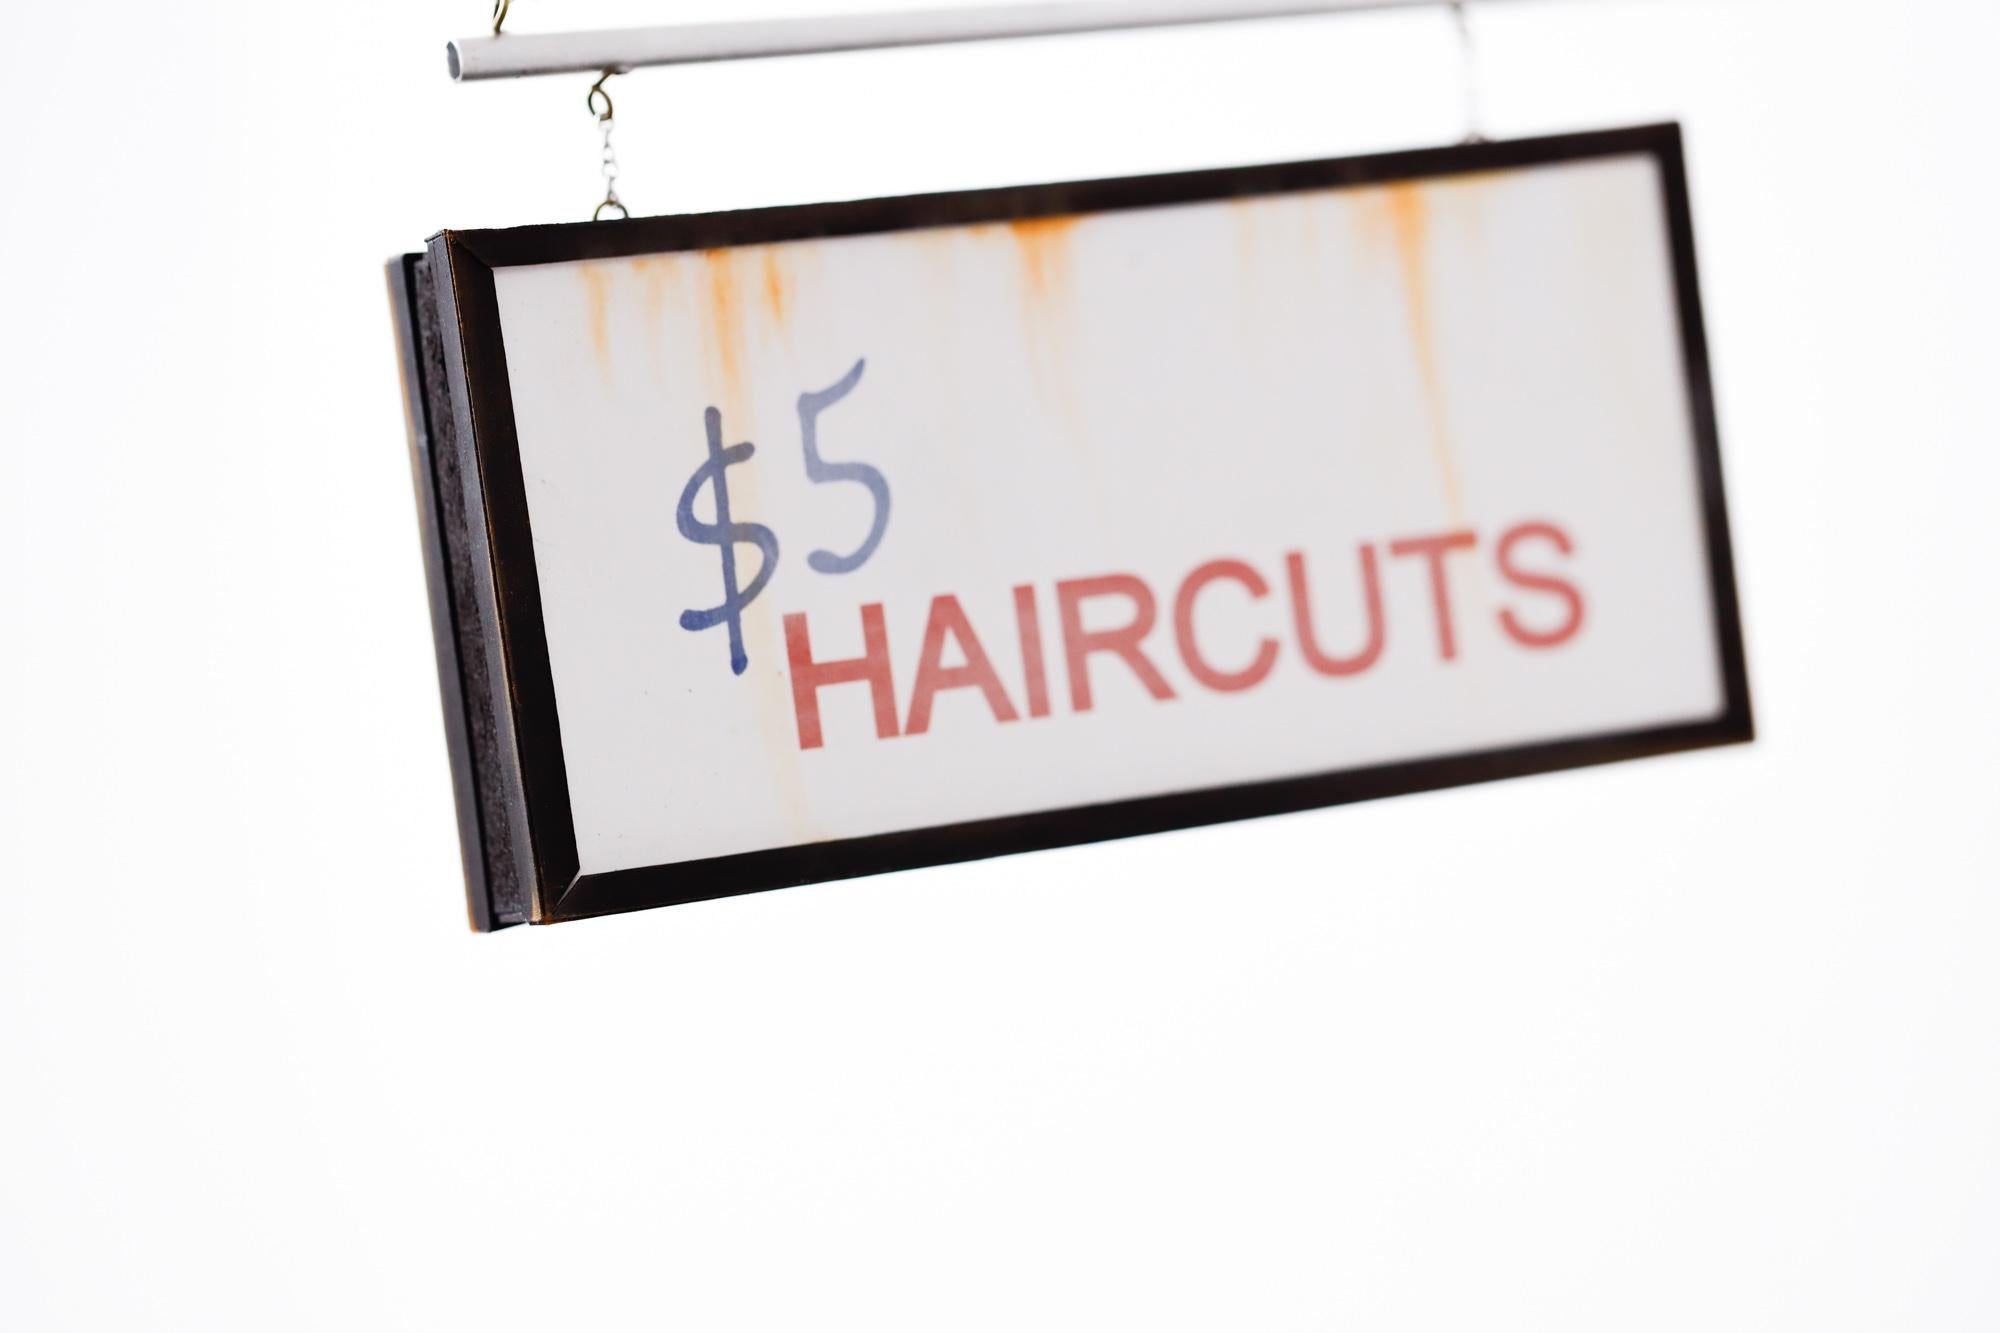 $5 Haircut - Contemporary Sculpture by Drew Leshko